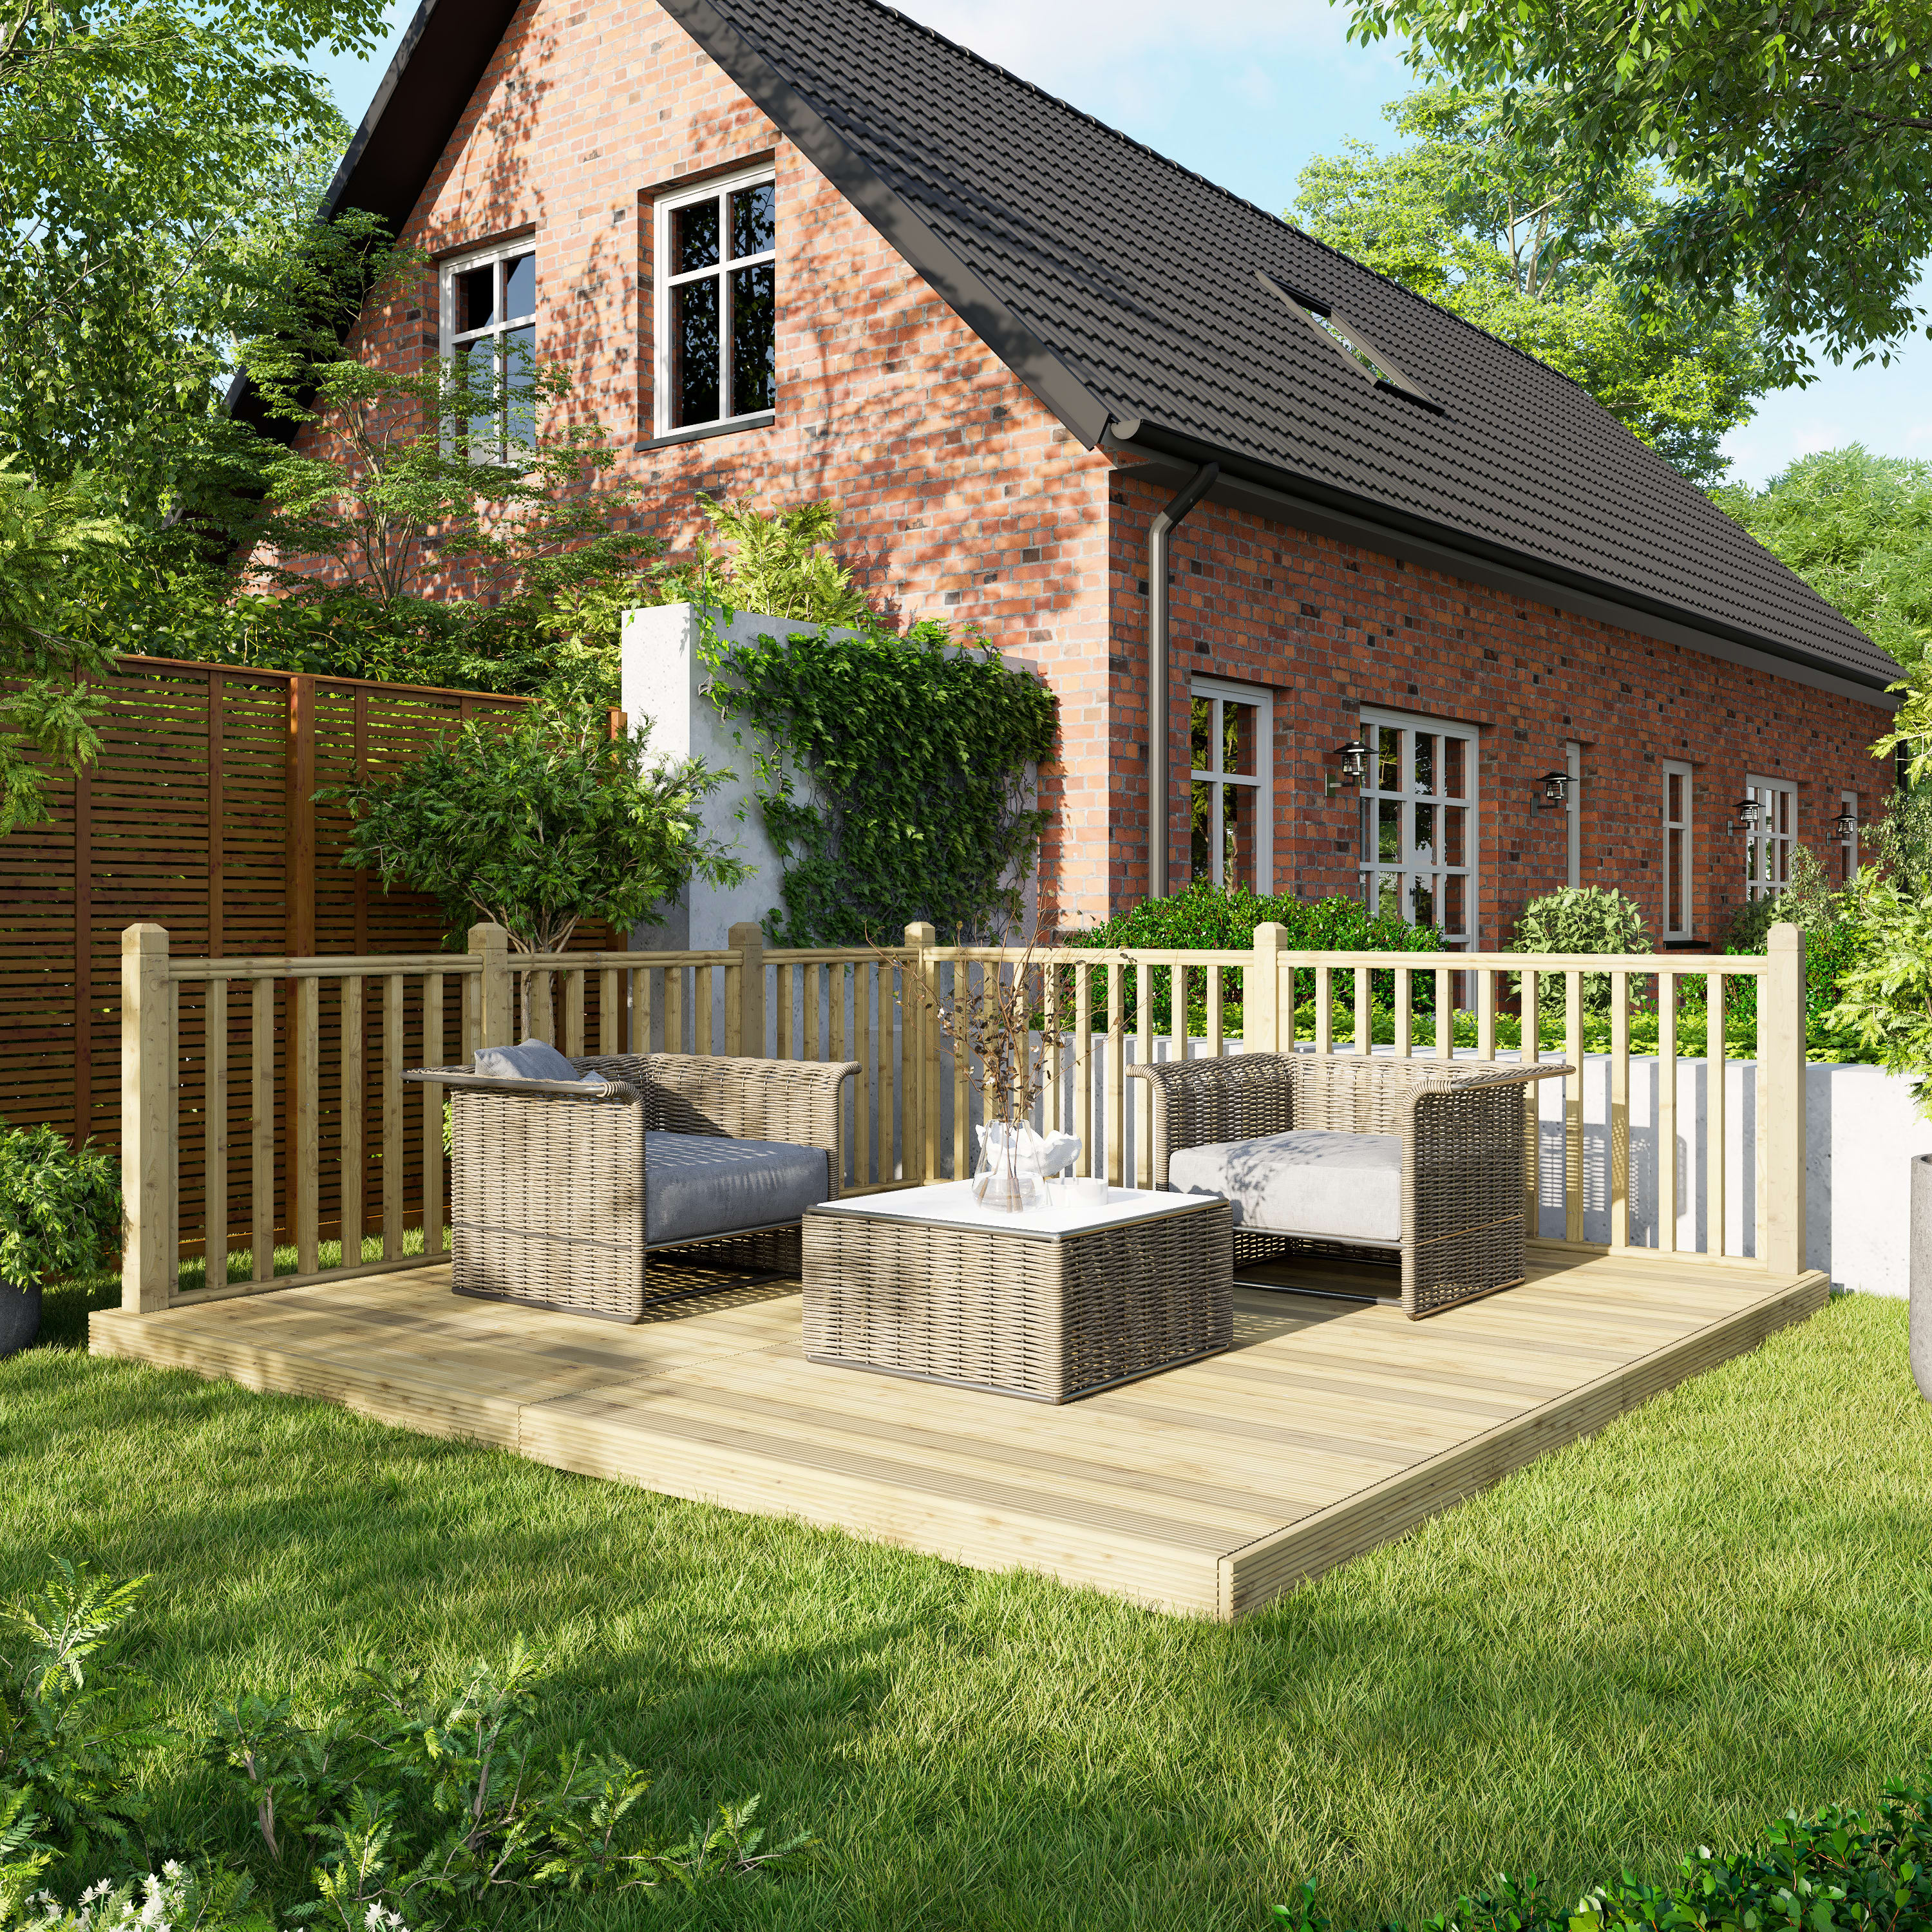 Power Timber Decking Kit Handrails on Two Sides